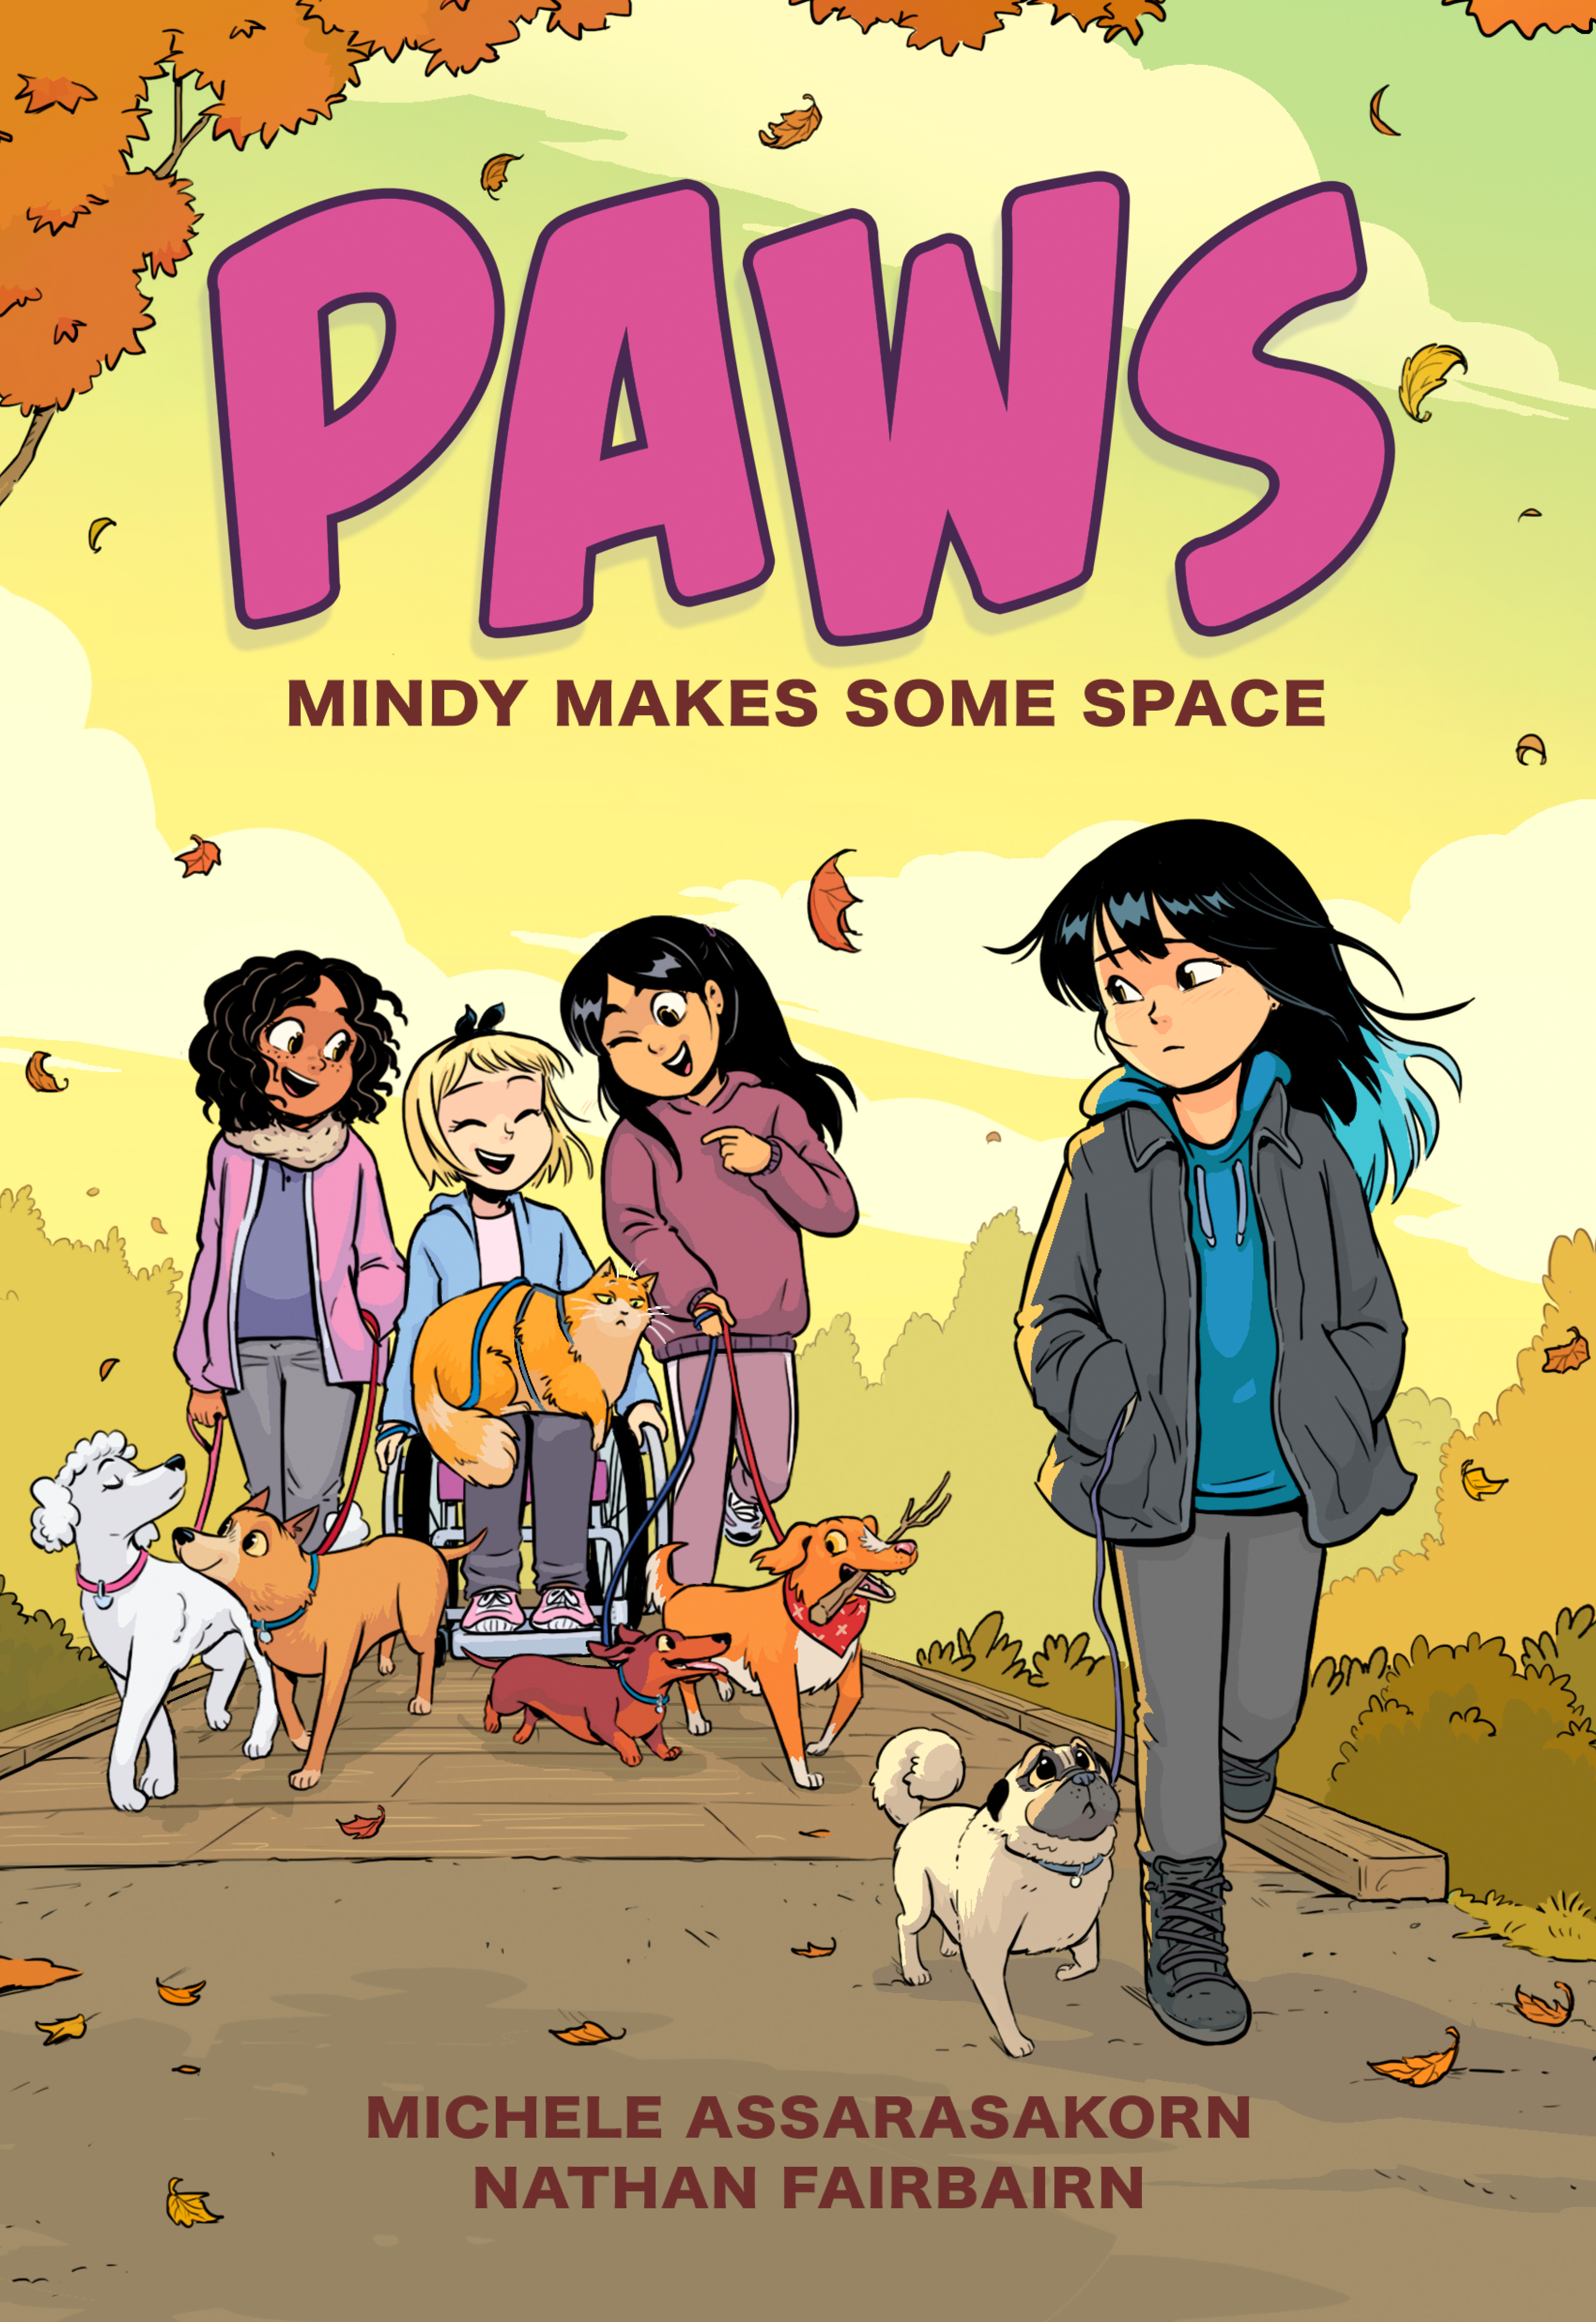 PAWS Vol.2 - Mindy Makes Some Space | Fairbairn, Nathan